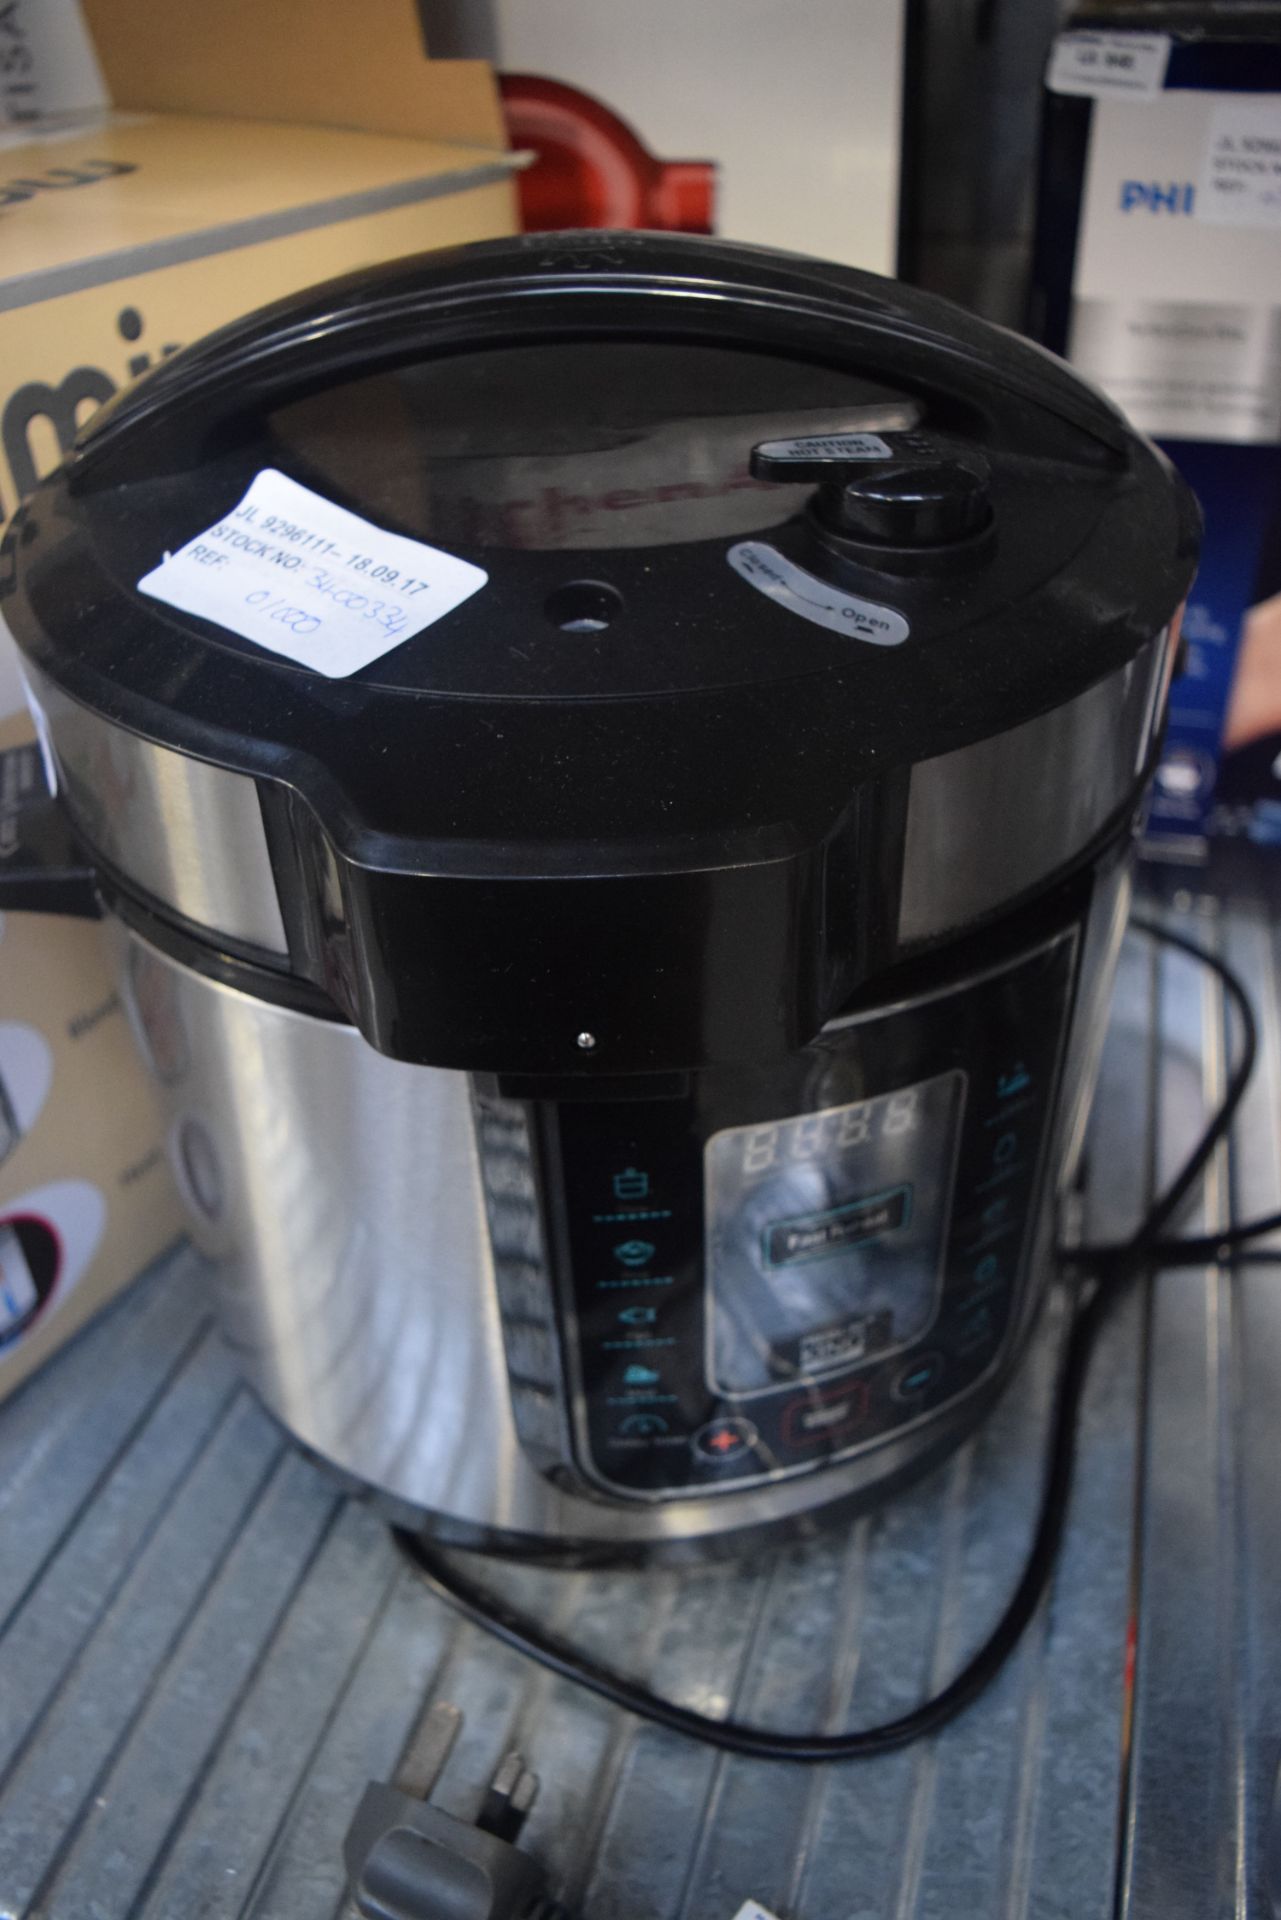 1 x PRESSURE COOKER RRP £100 18.09.17 3400334 *PLEASE NOTE THAT THE BID PRICE IS MULTIPLIED BY THE